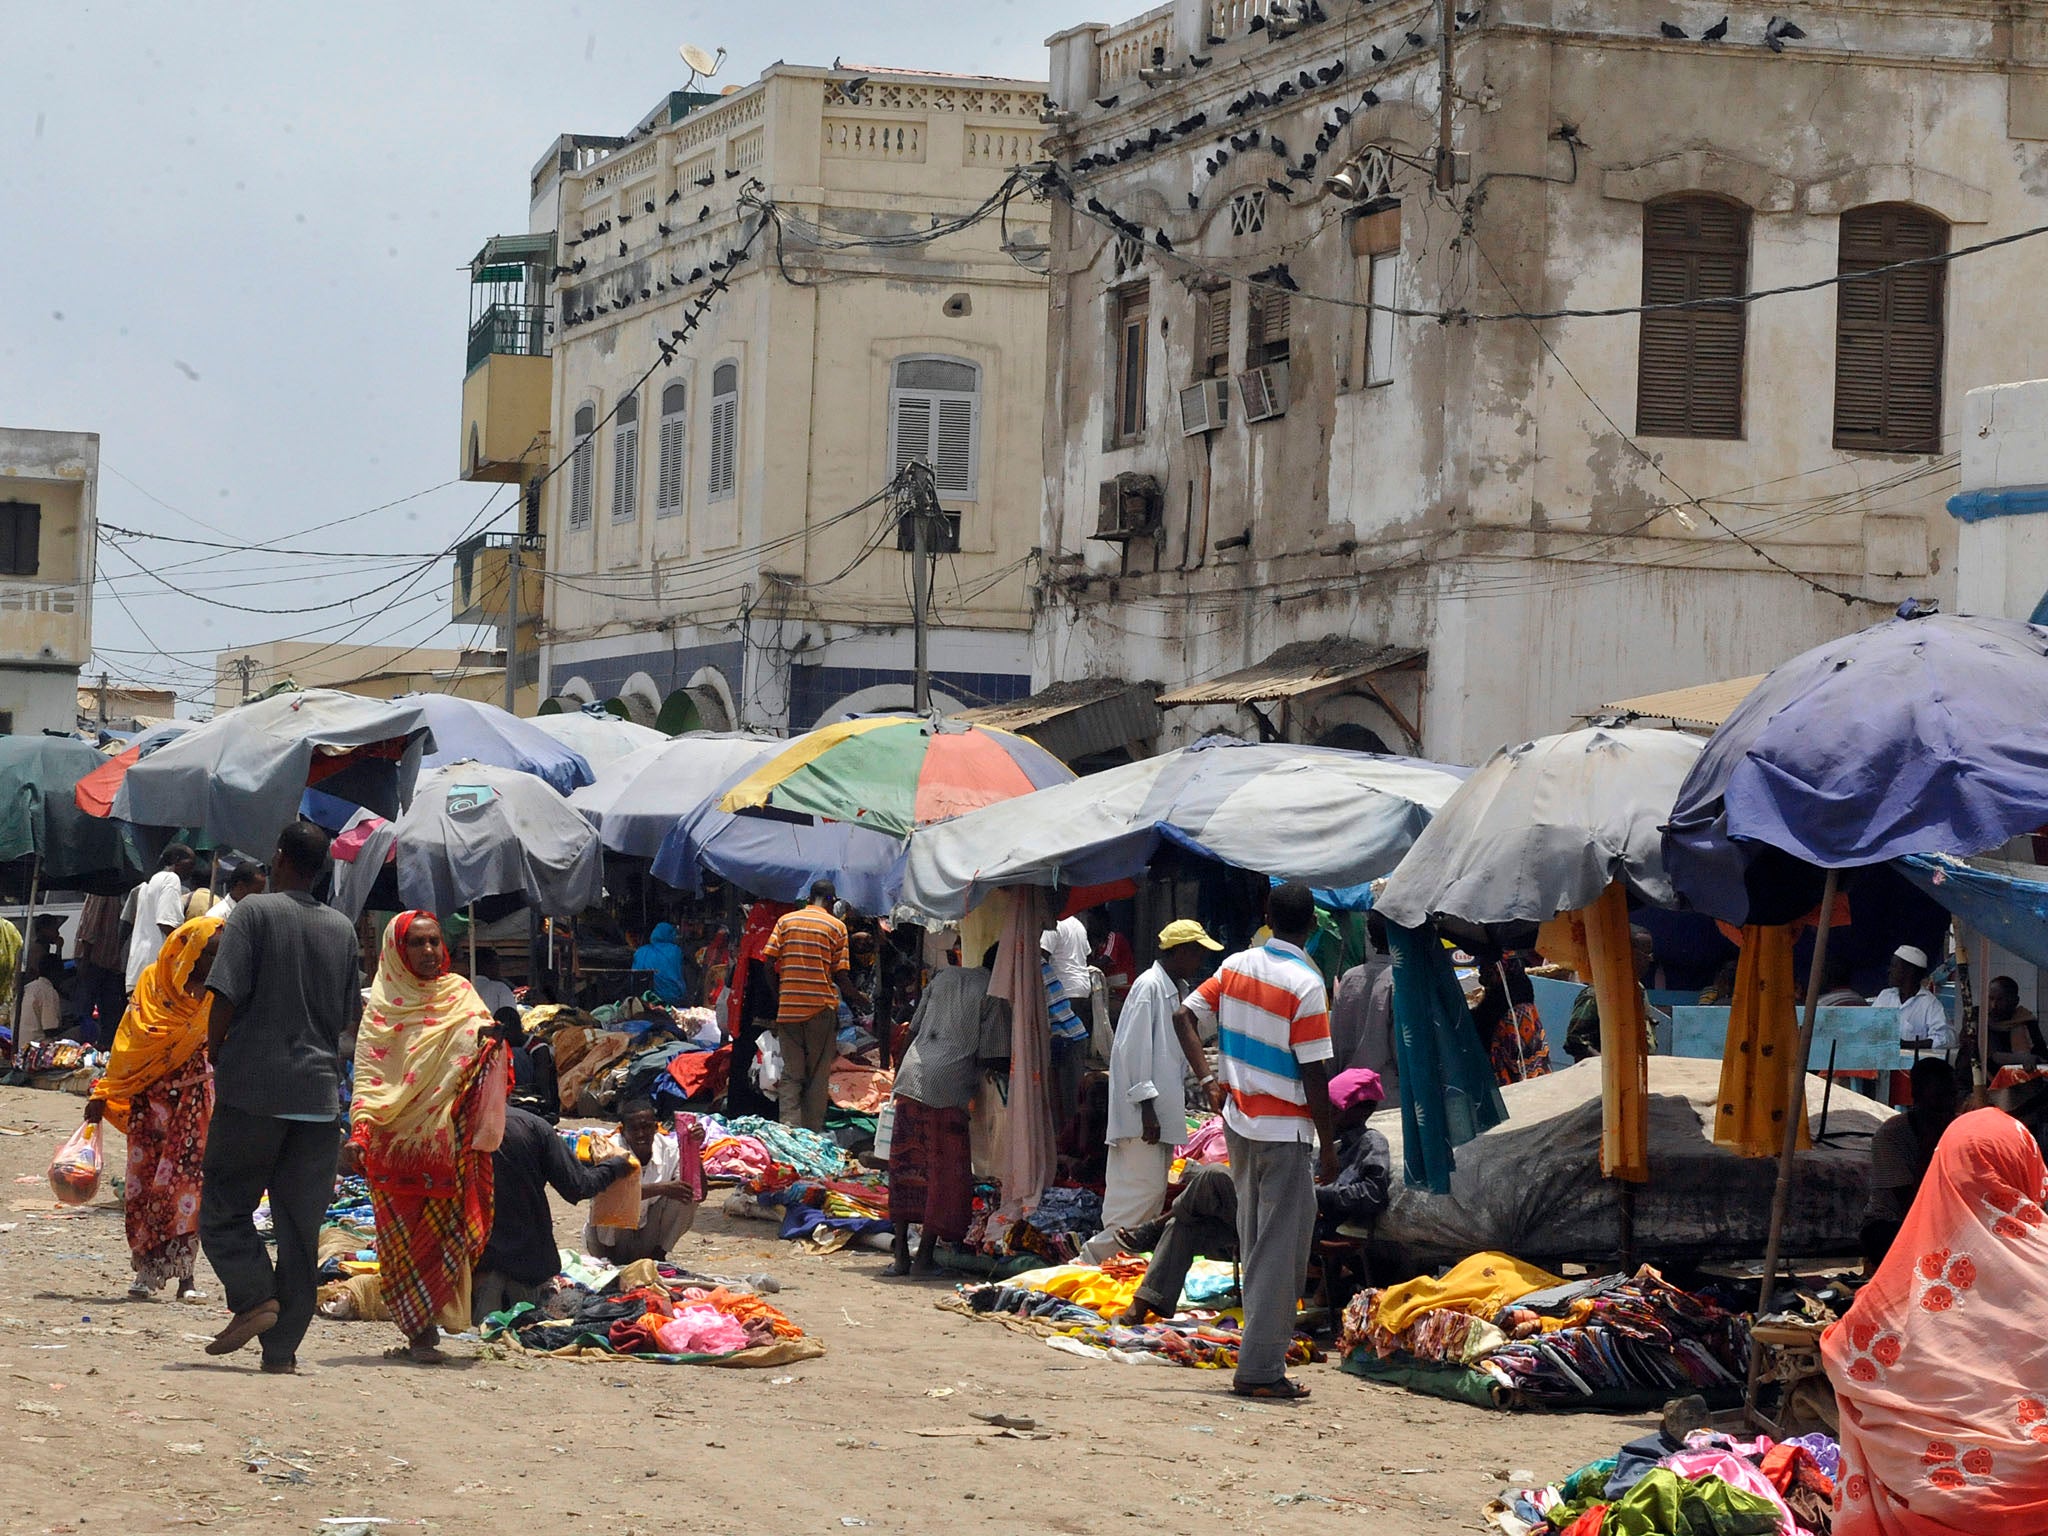 Djibouti: From where the three Europeans were allegedly taken